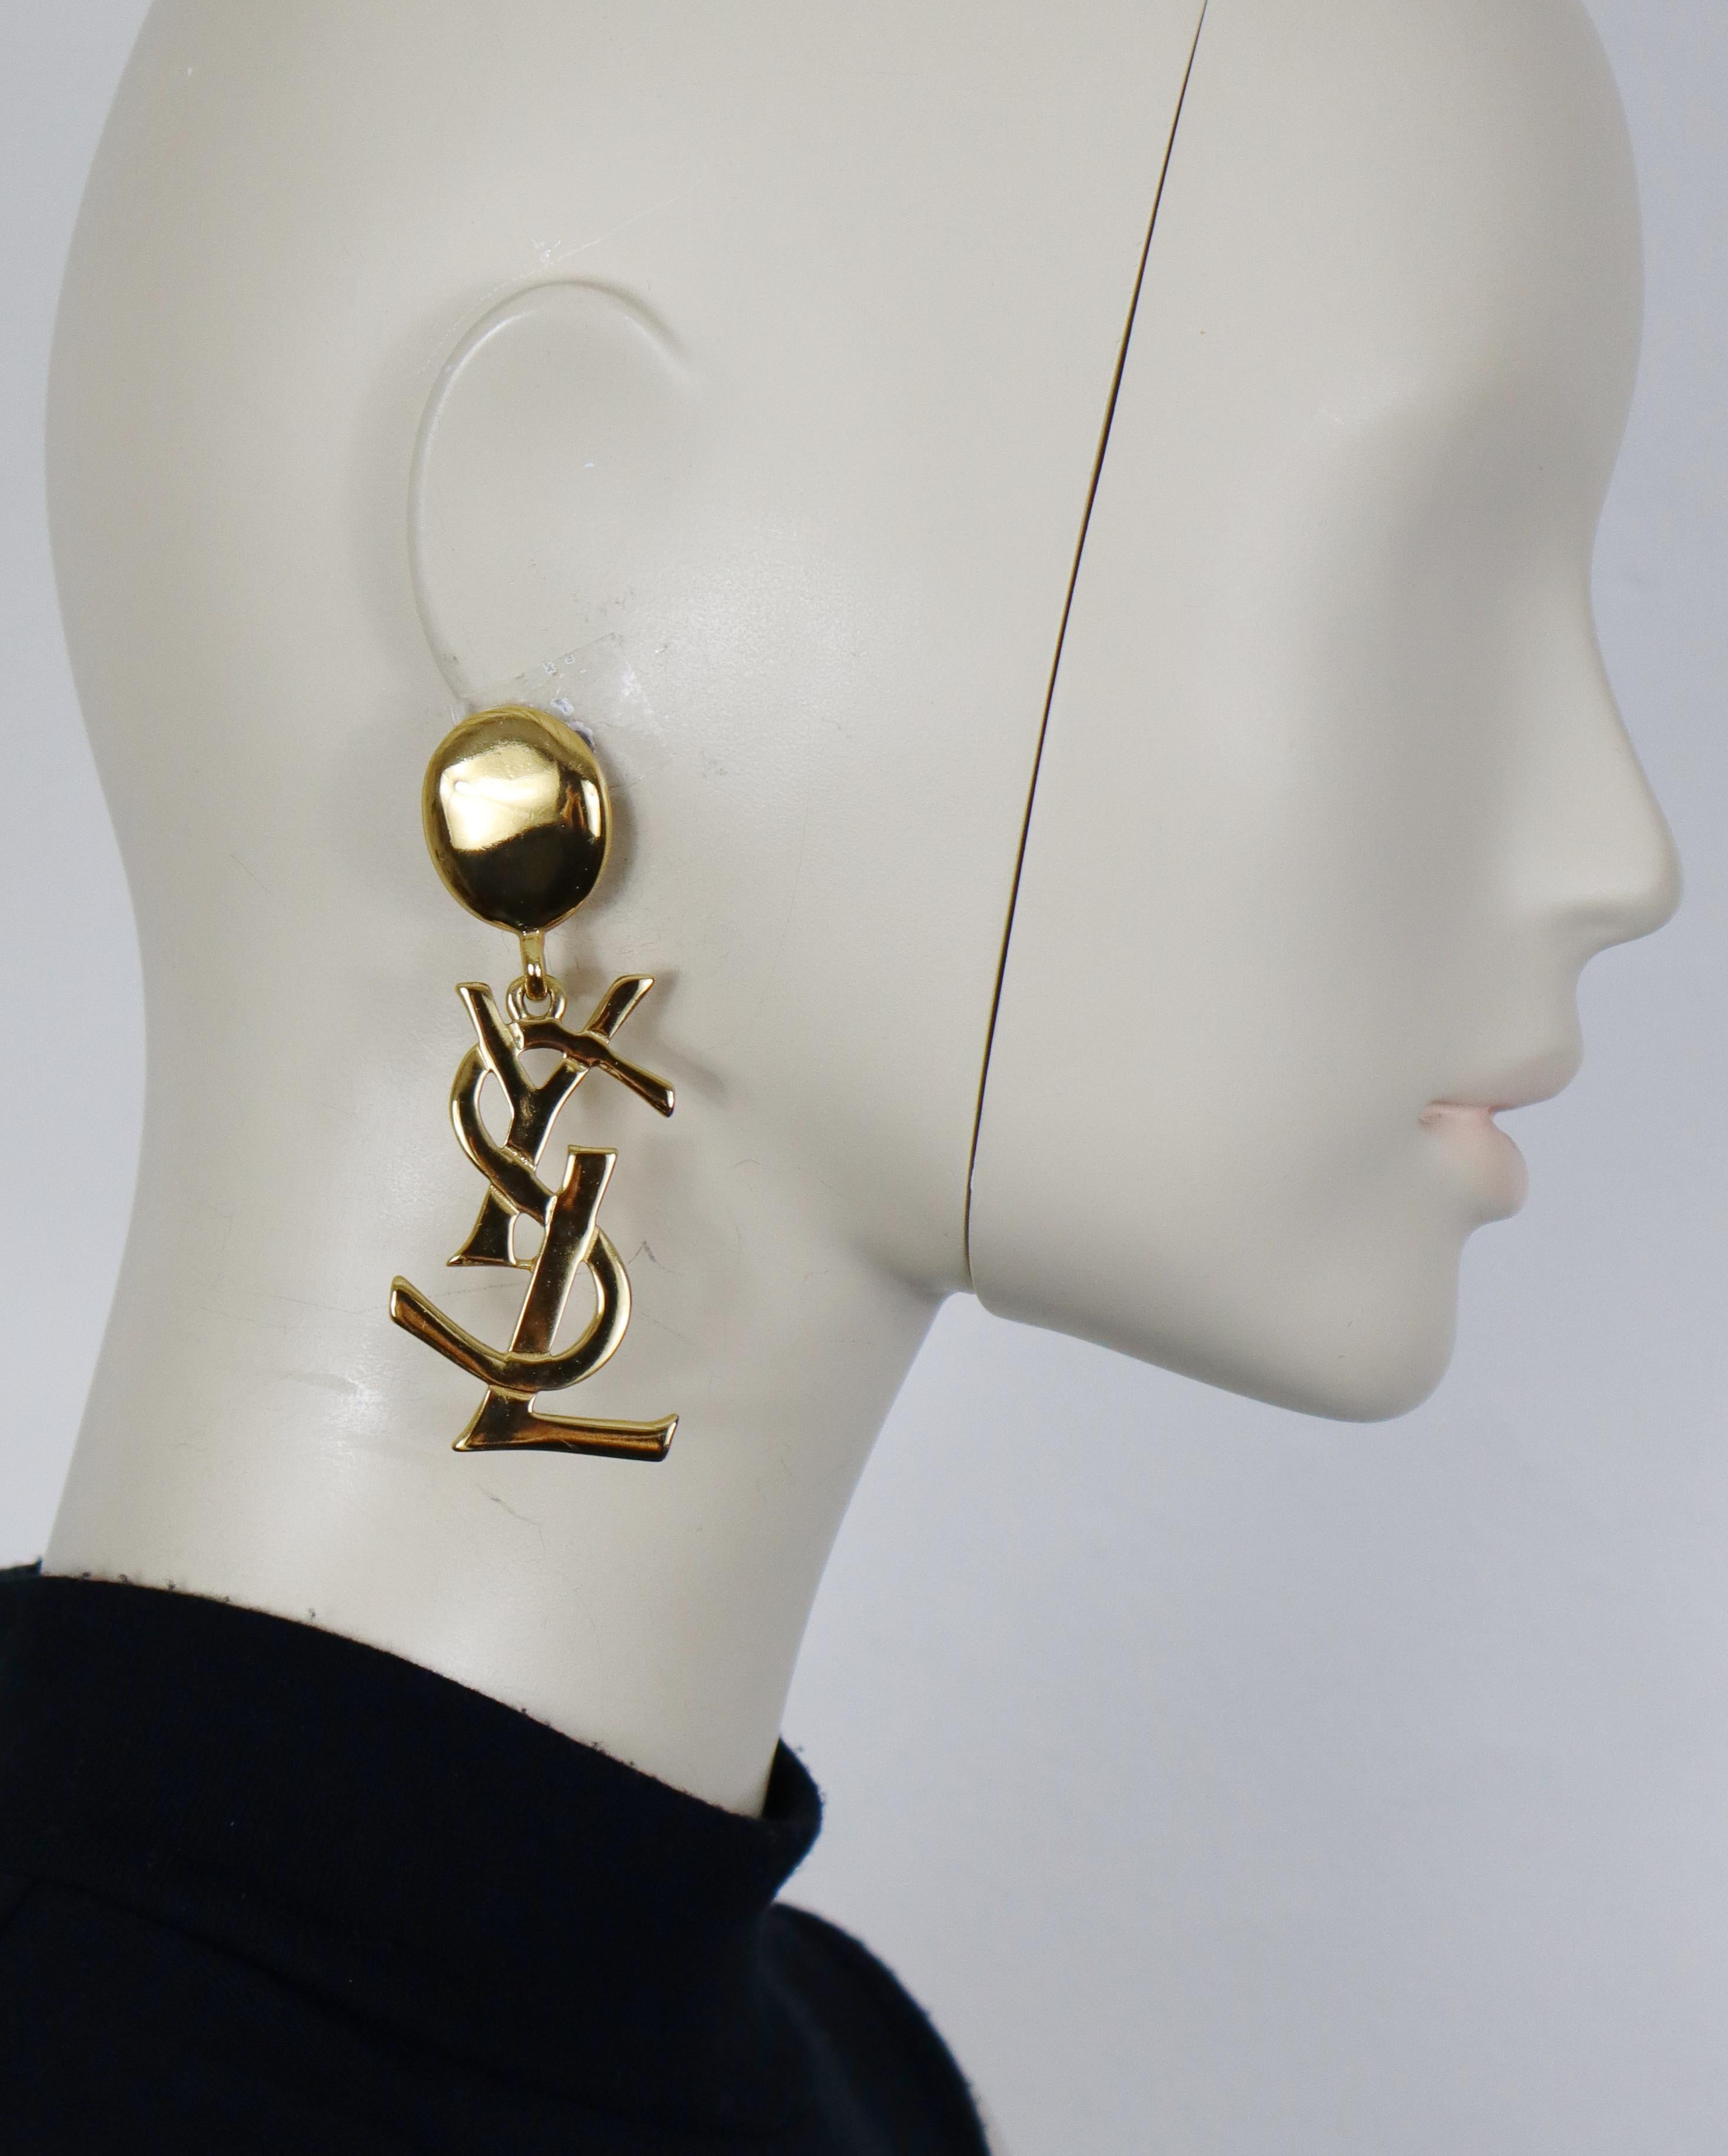 YVES SAINT LAURENT vintage massive gold tone iconic dangling earrings (clip on) featuring the YSL logo.

Embossed YSL Made in France.

Indicative measurements : height approx. 8.3 cm (approx. 3.27 inches) / max. width approx. 2.7 cm (1.06